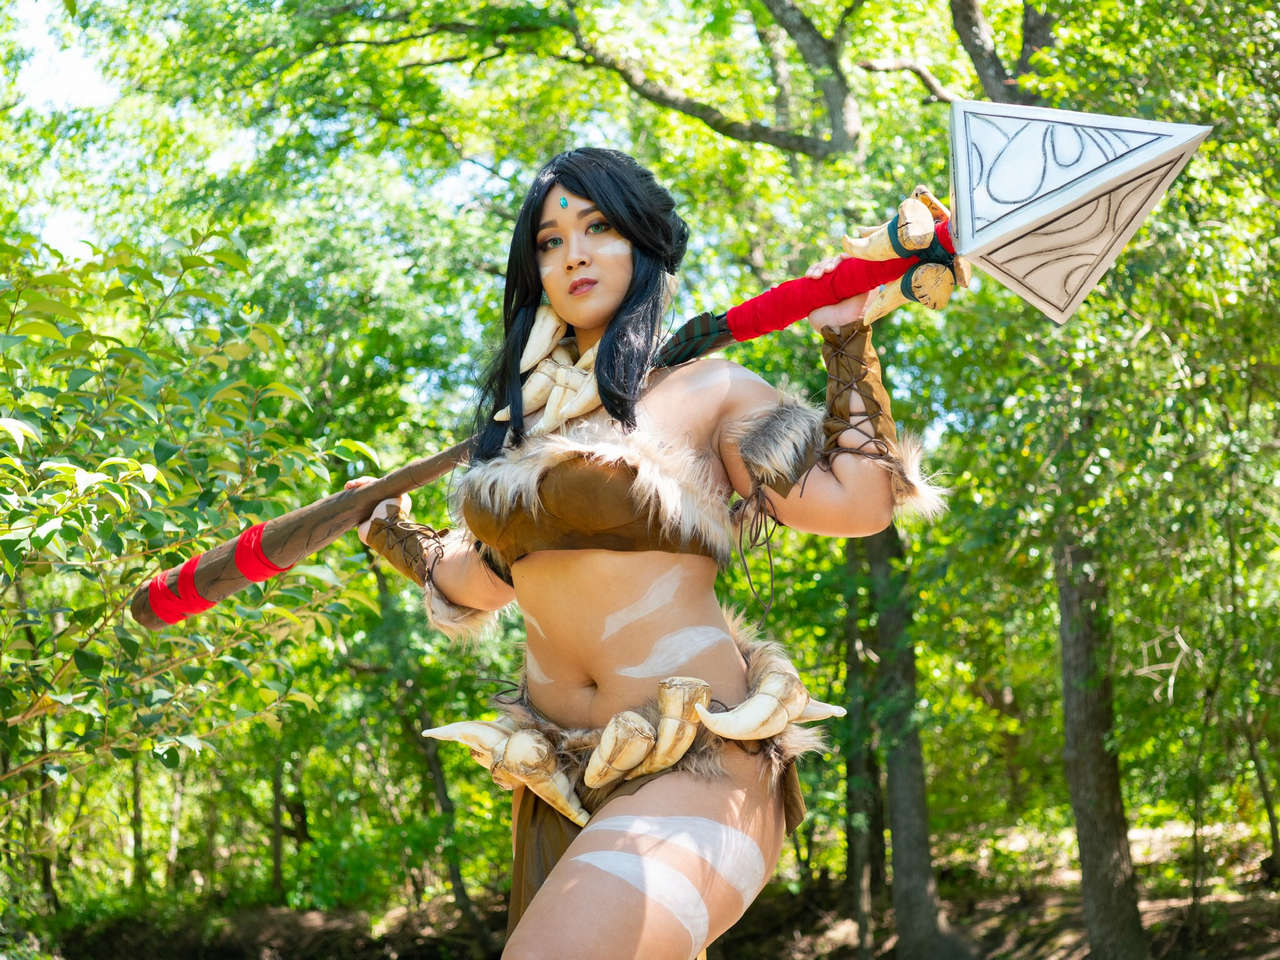 Mishamai As Nidalee From League Of Legends Foun